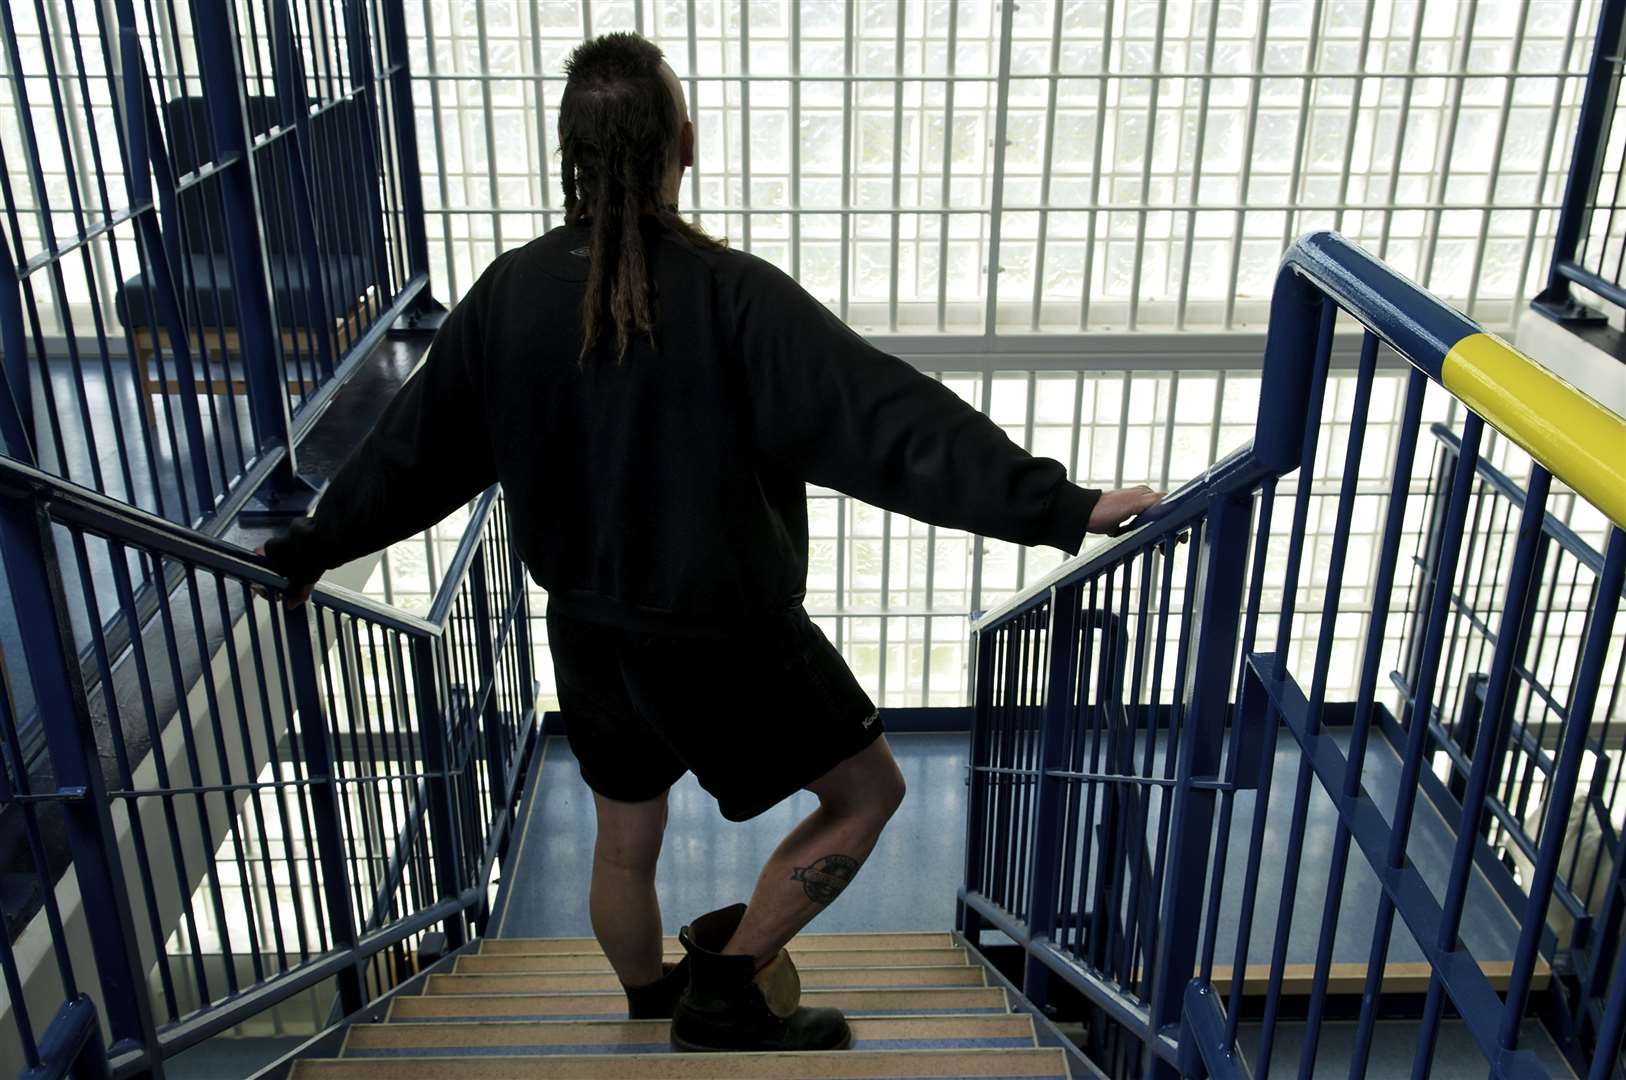 An IMB report about HMP Swaleside said it had made many improvements, but could still do better